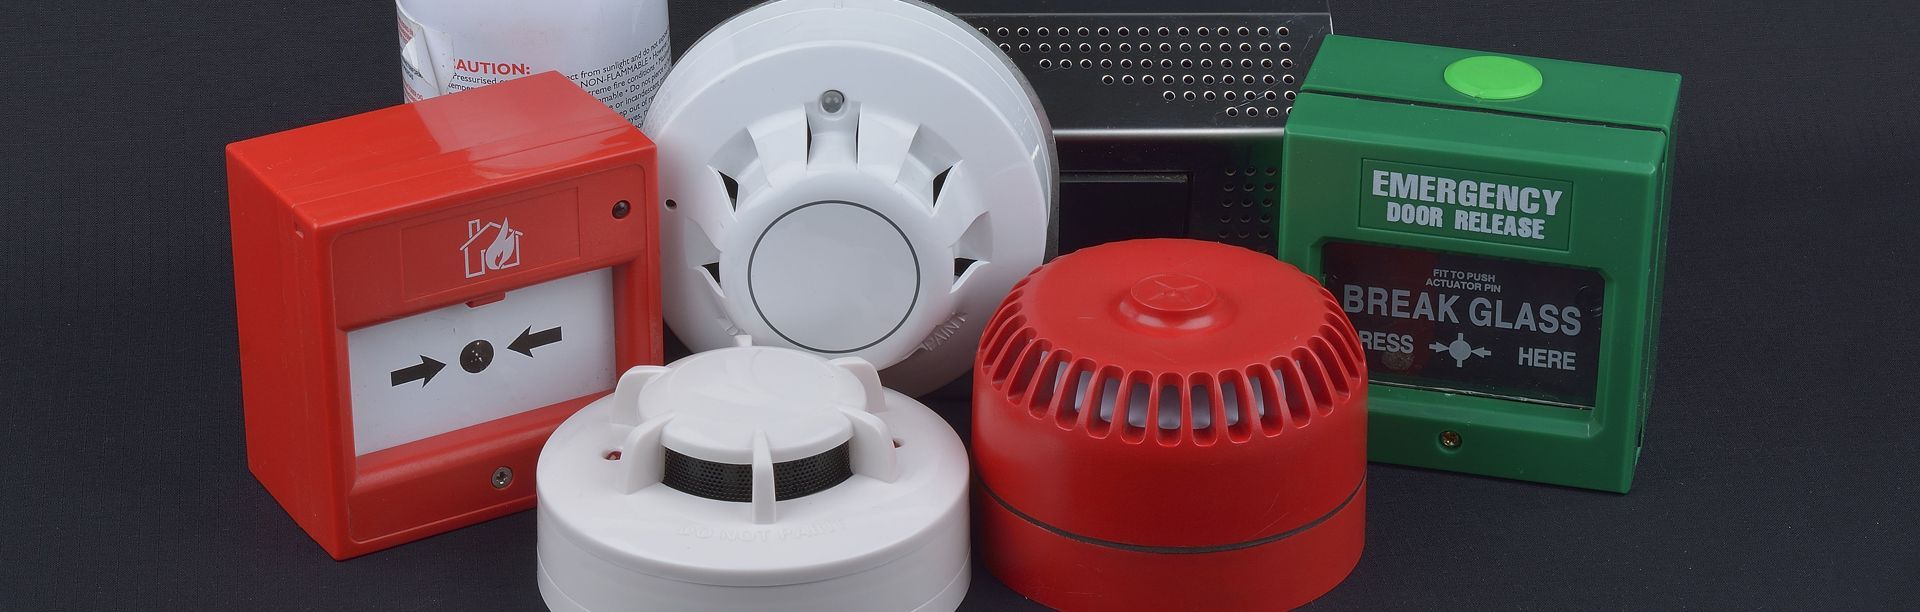 Fire alarm monitoring systems